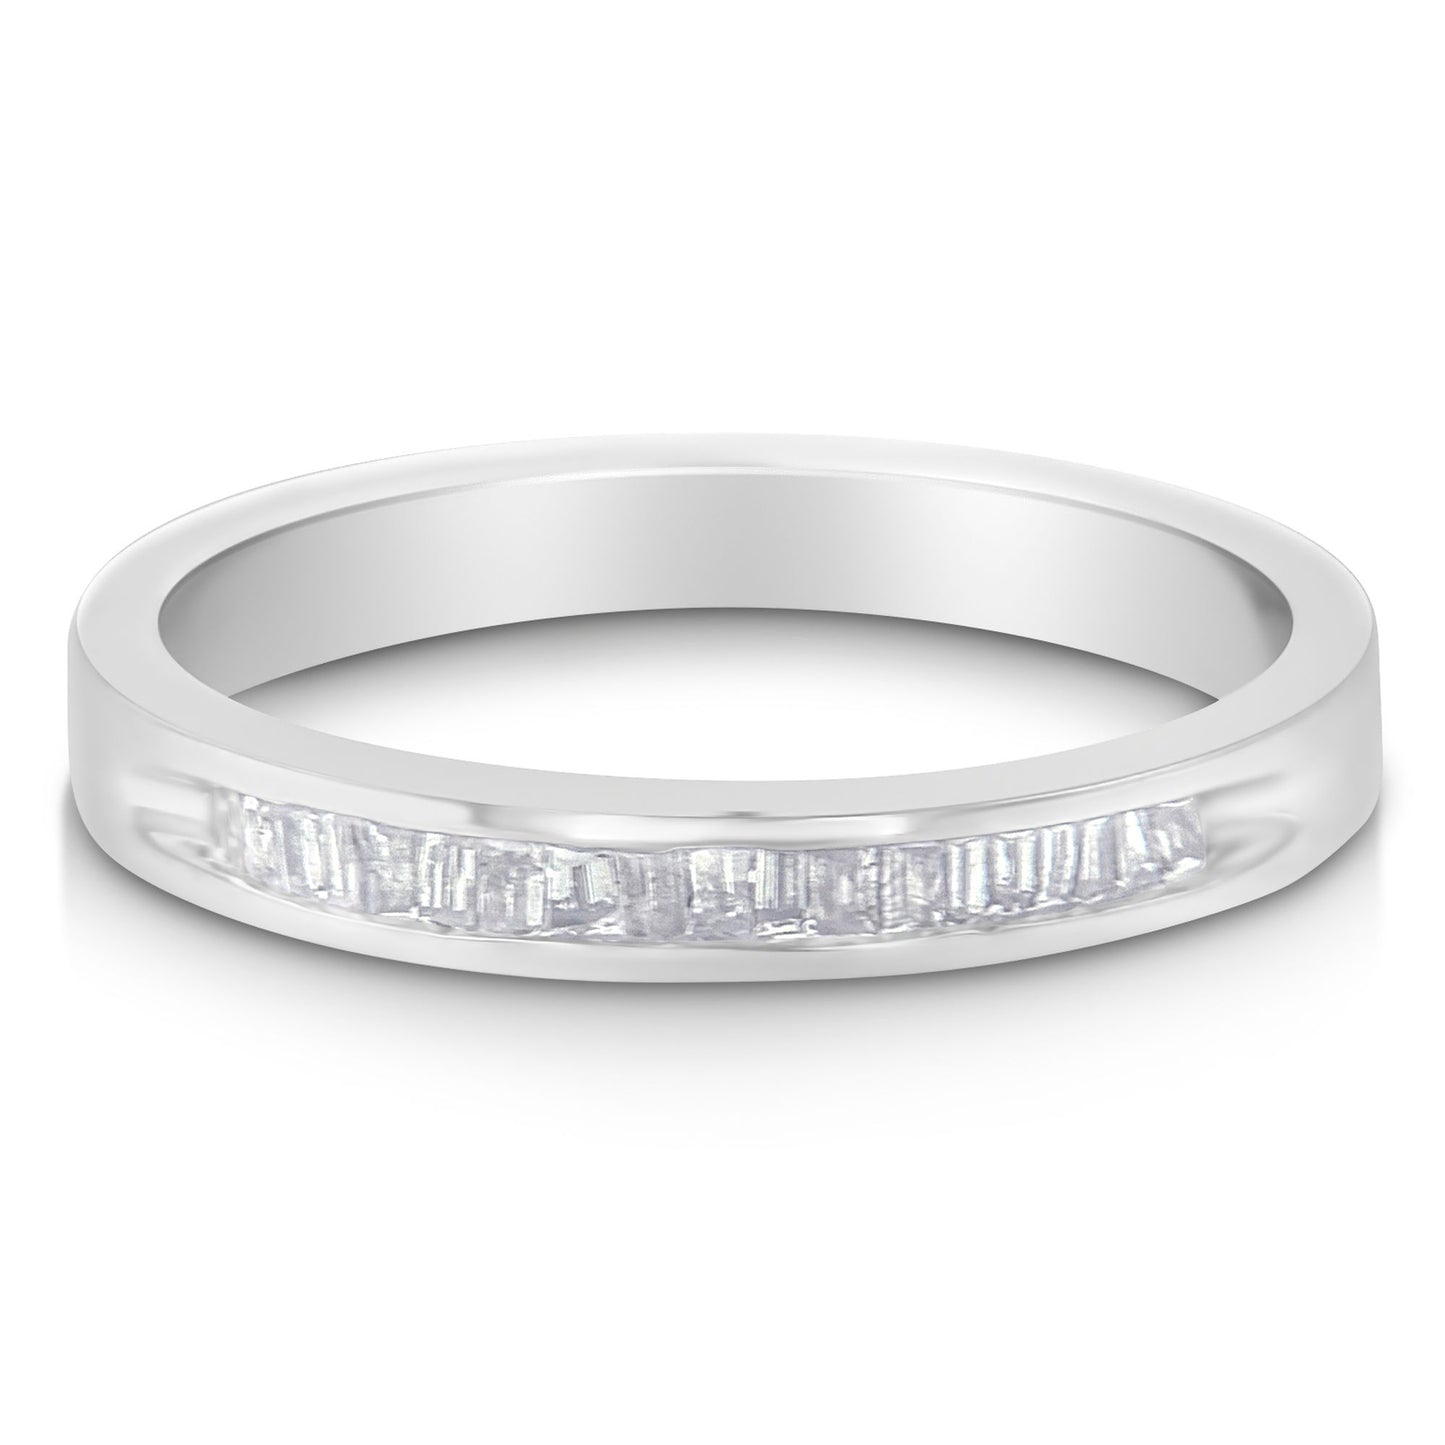 1/5 cttw Diamond Channel-Set Stackable Band Ring in Sterling Silver